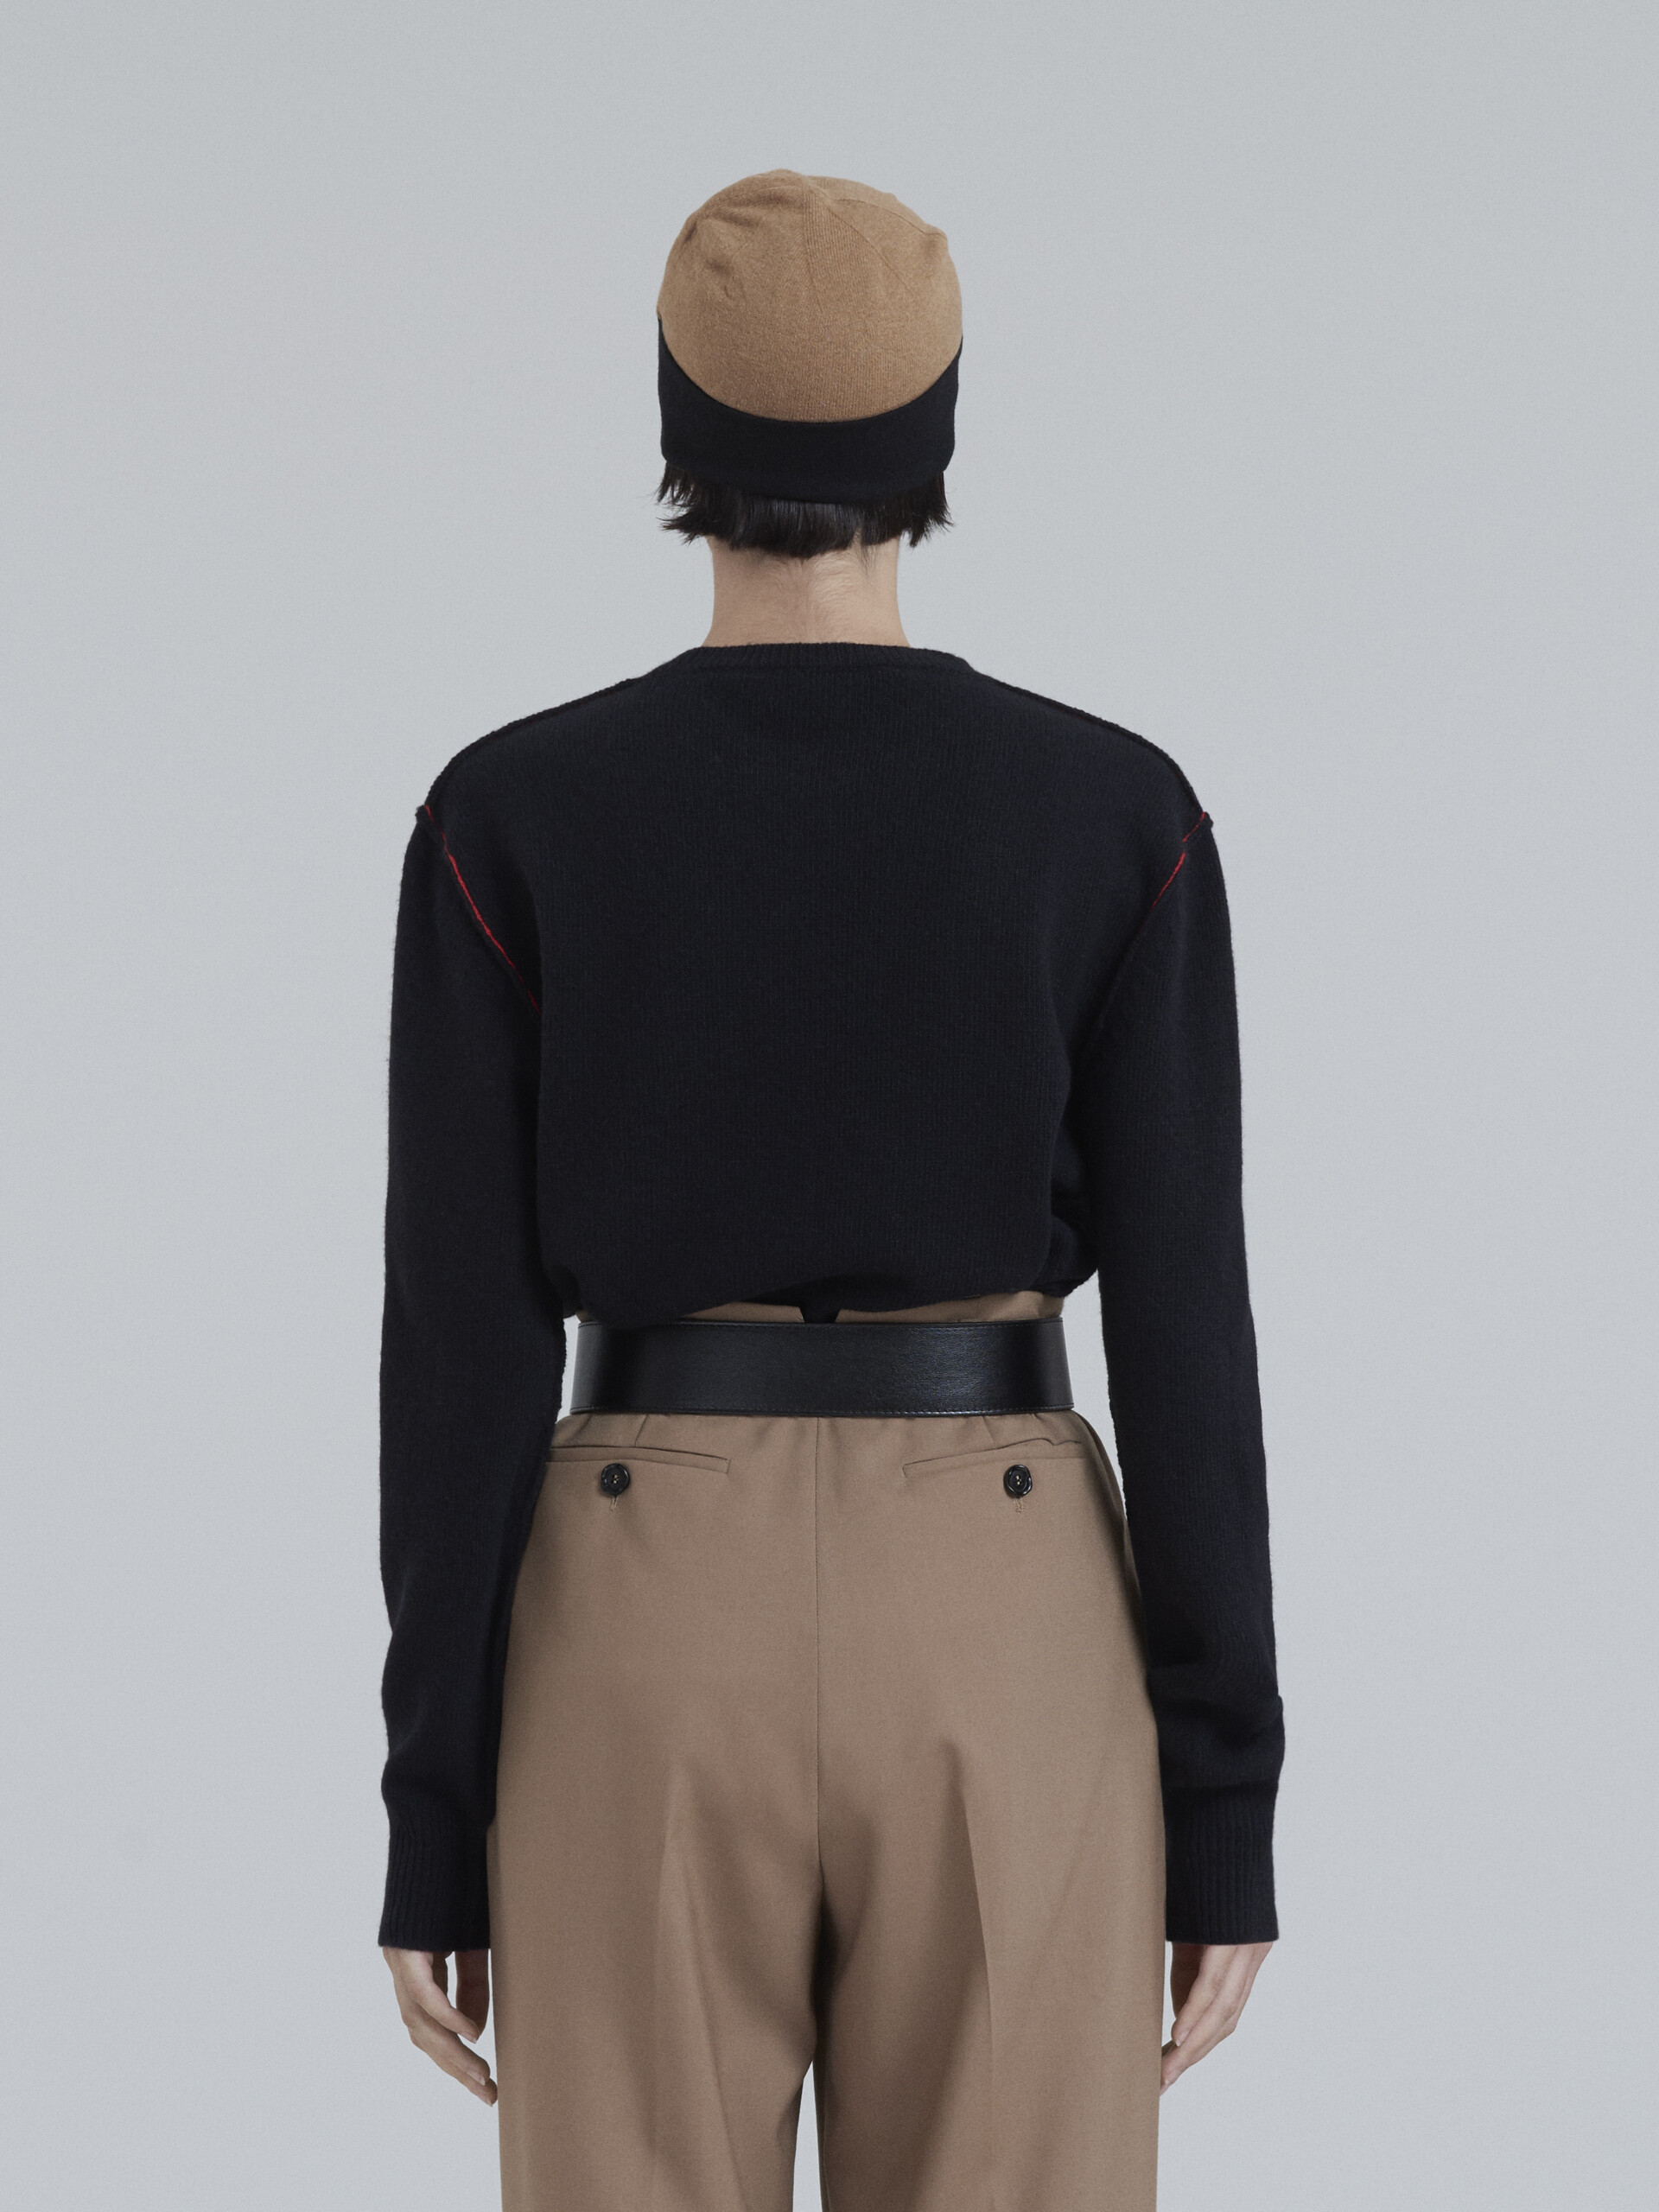 Black Shetland wool long-sleeved sweater with embroidered Marni logo - Pullovers - Image 3